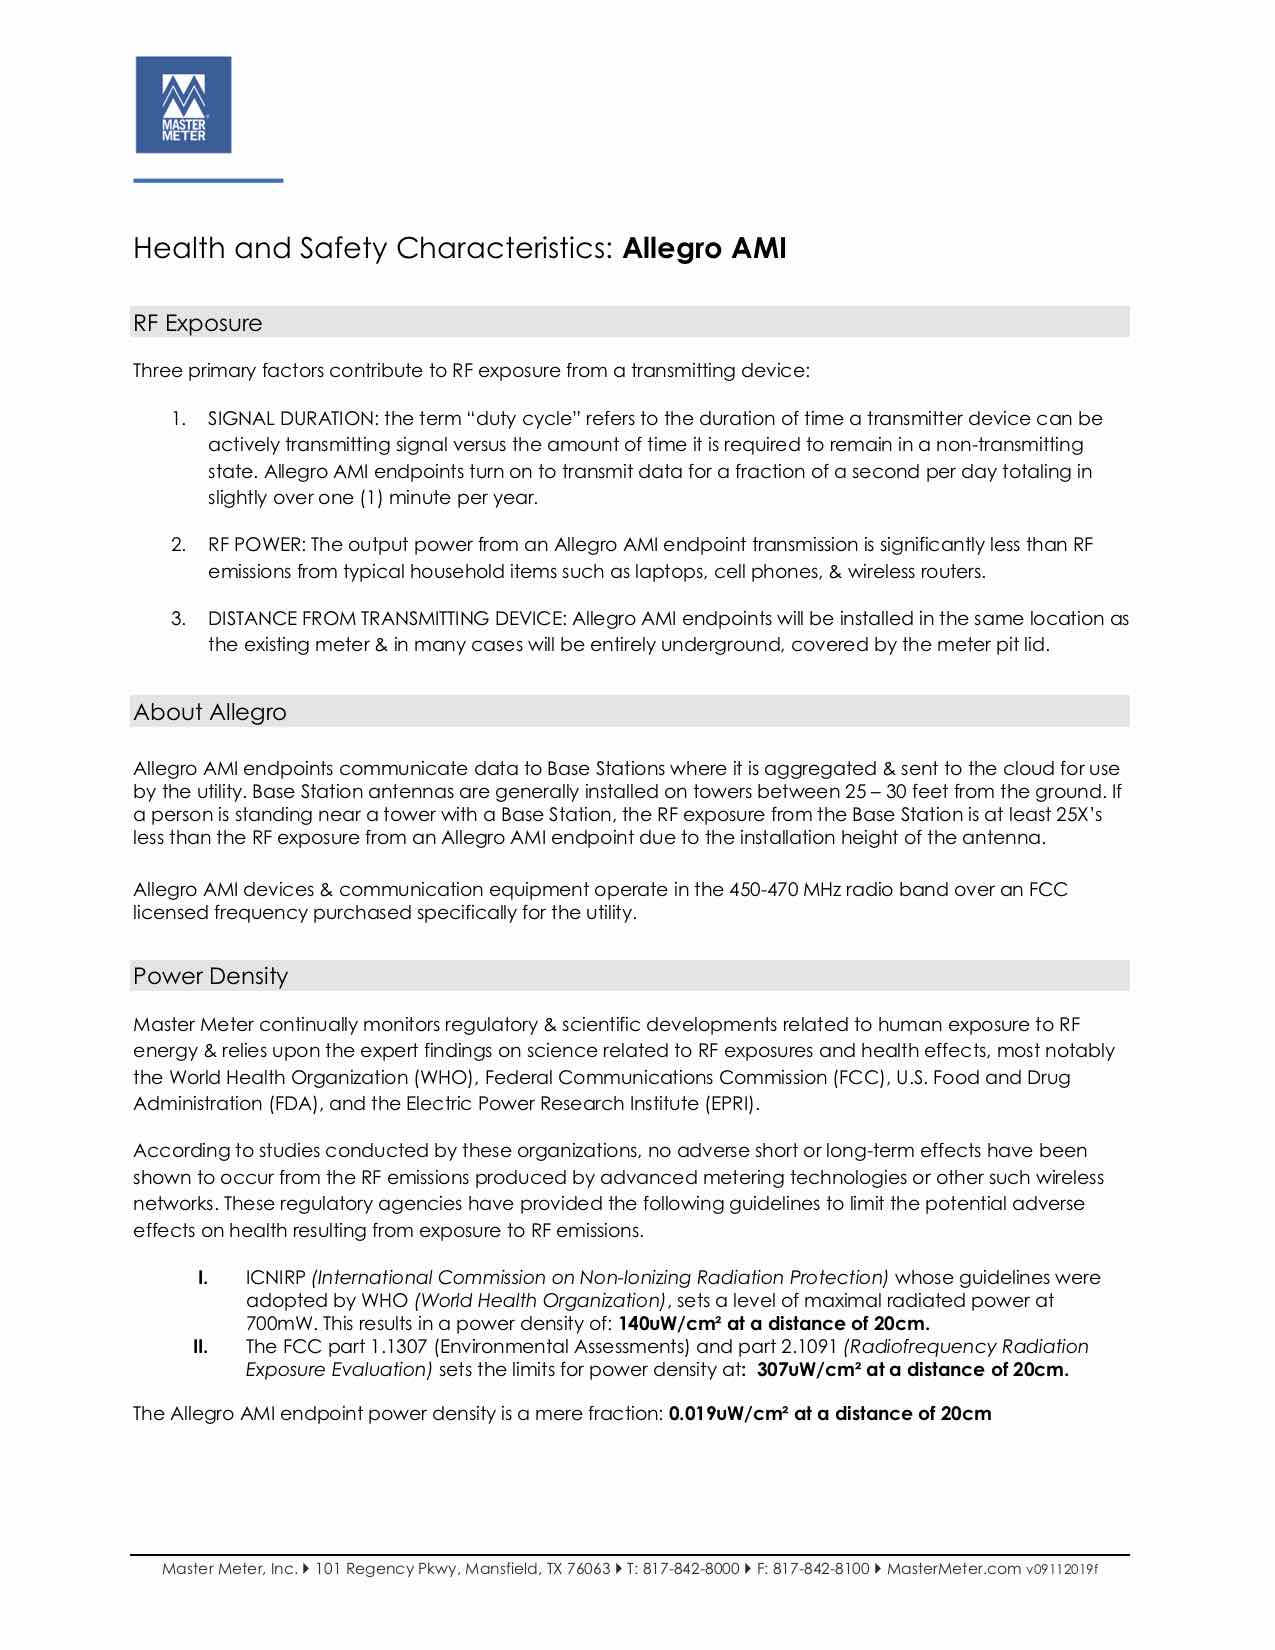 RF Health and Safety - Allegro AMI